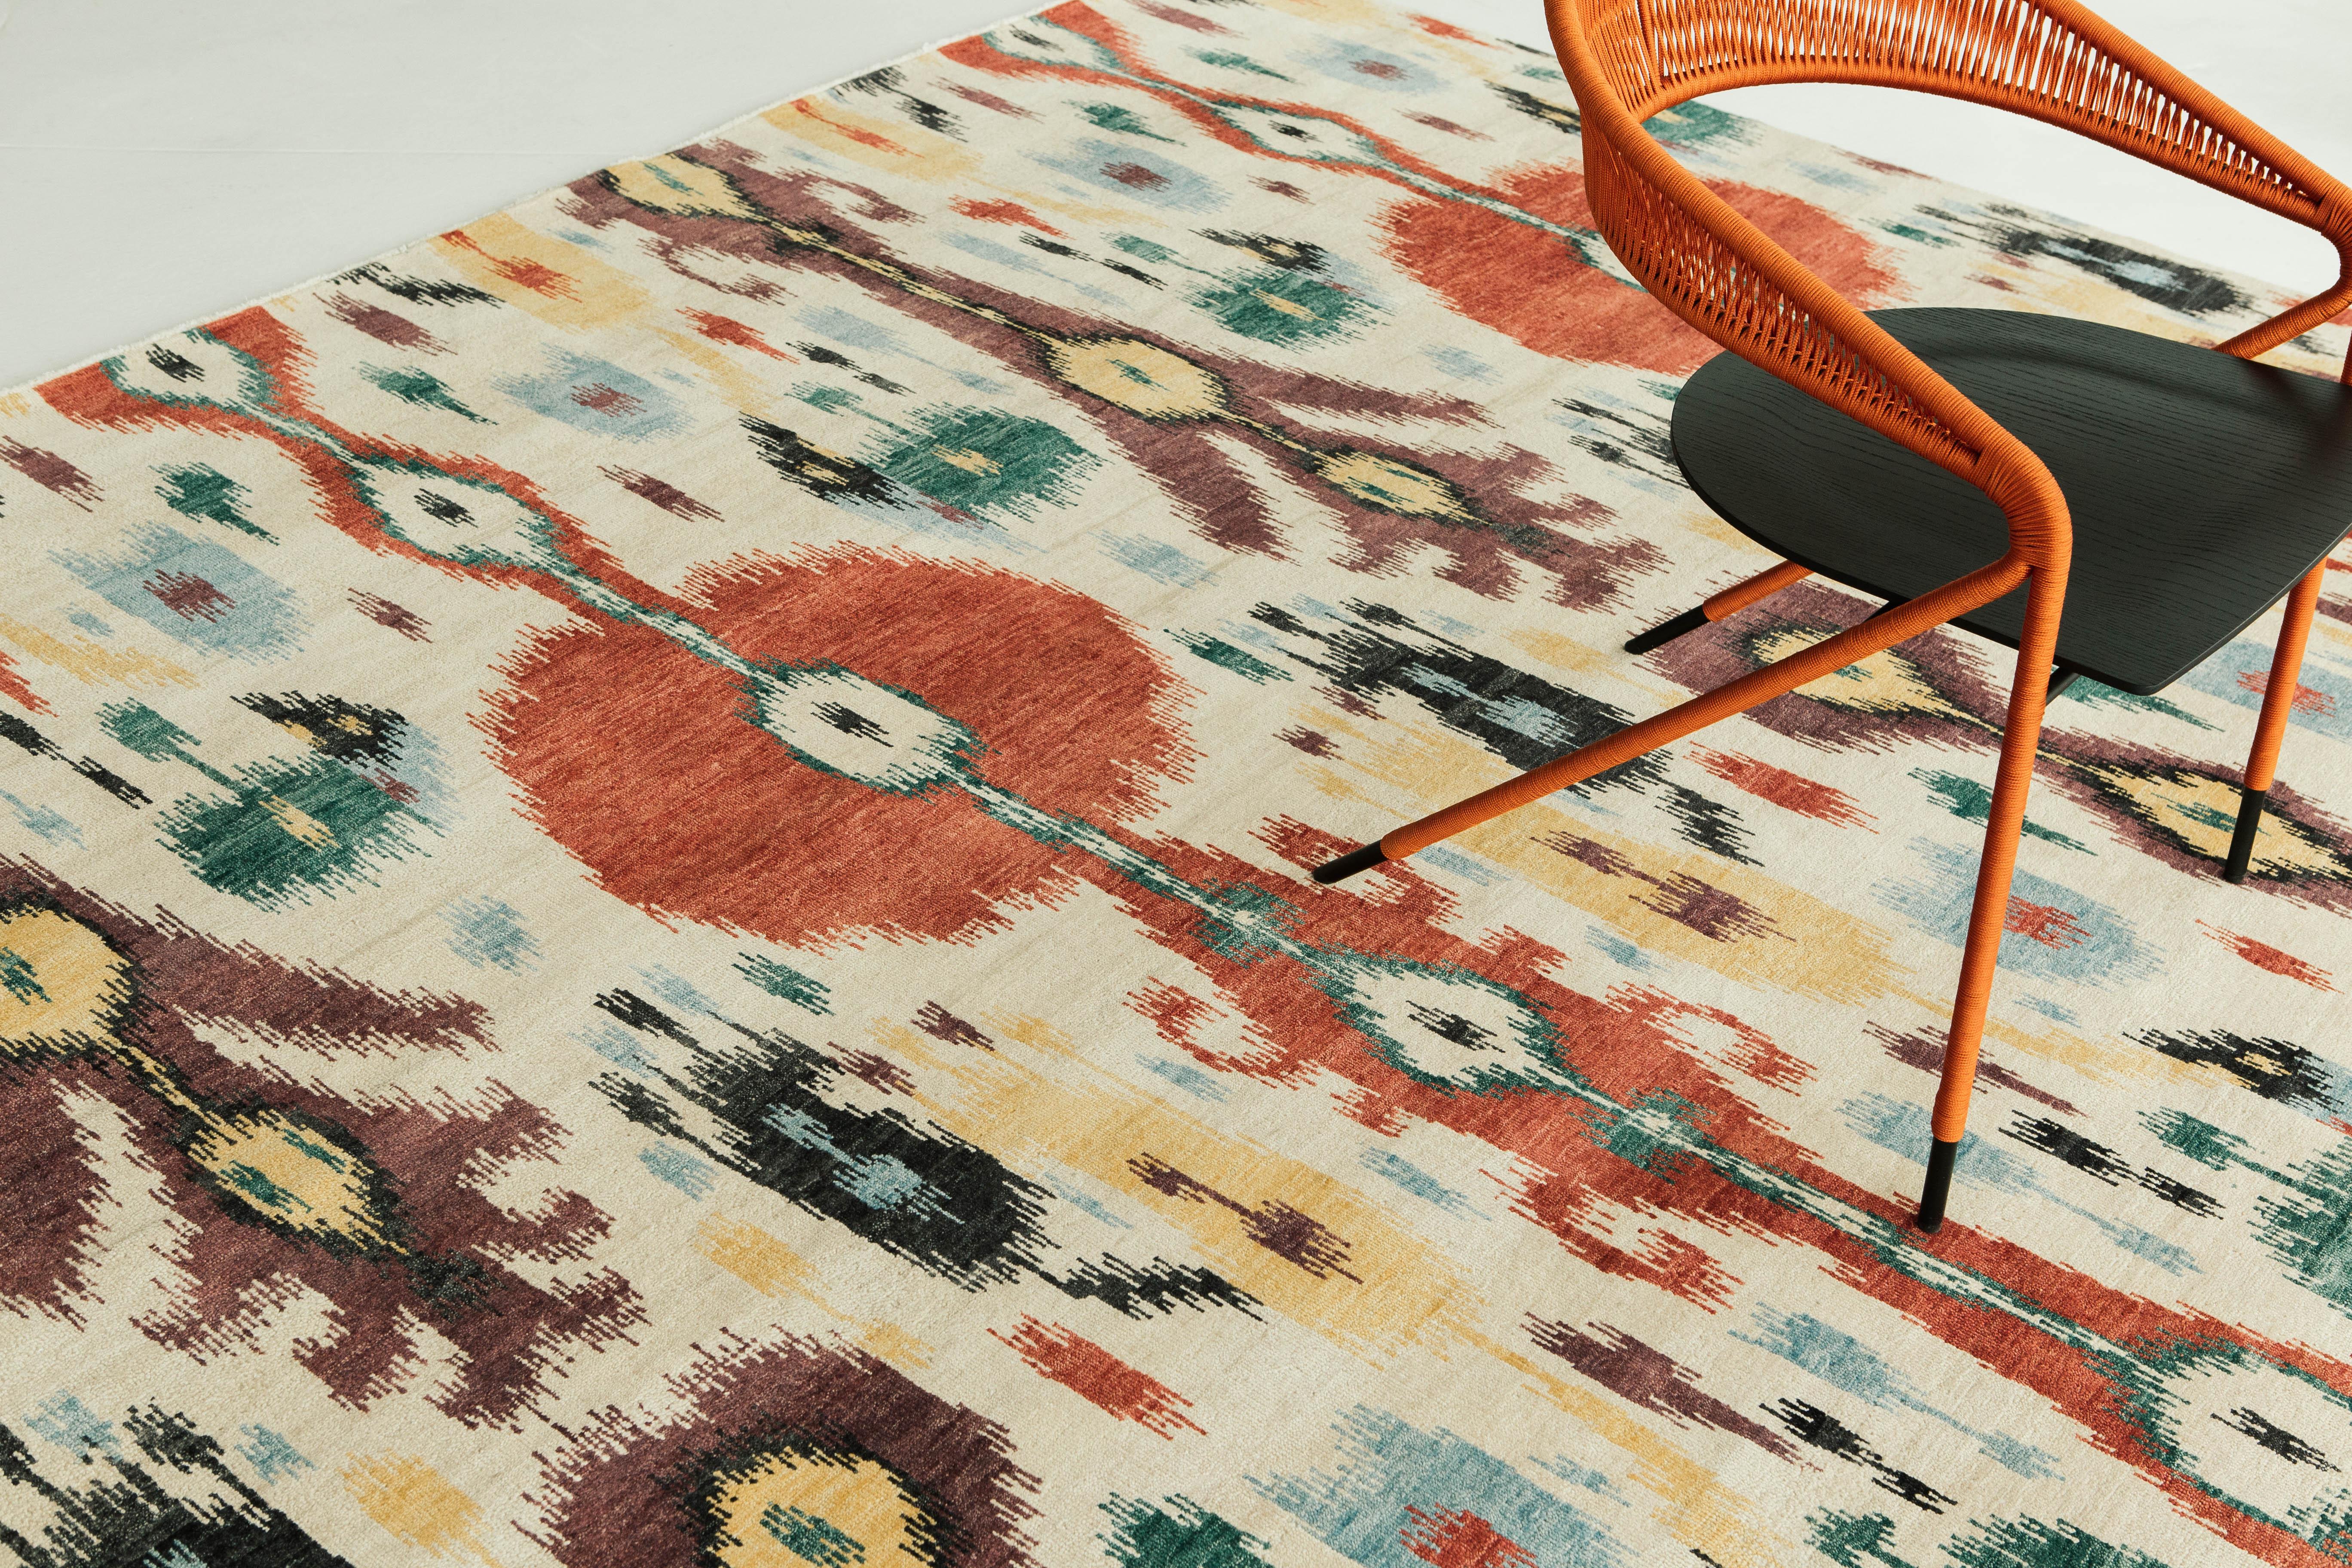 A colorful and lively Ikat design rug. 'Ataru' has a bold and playful essence and will leave lasting impressions. Ikat designs have been globally inspired for today's modern design world.



Rug number 22798
Size 9' 2